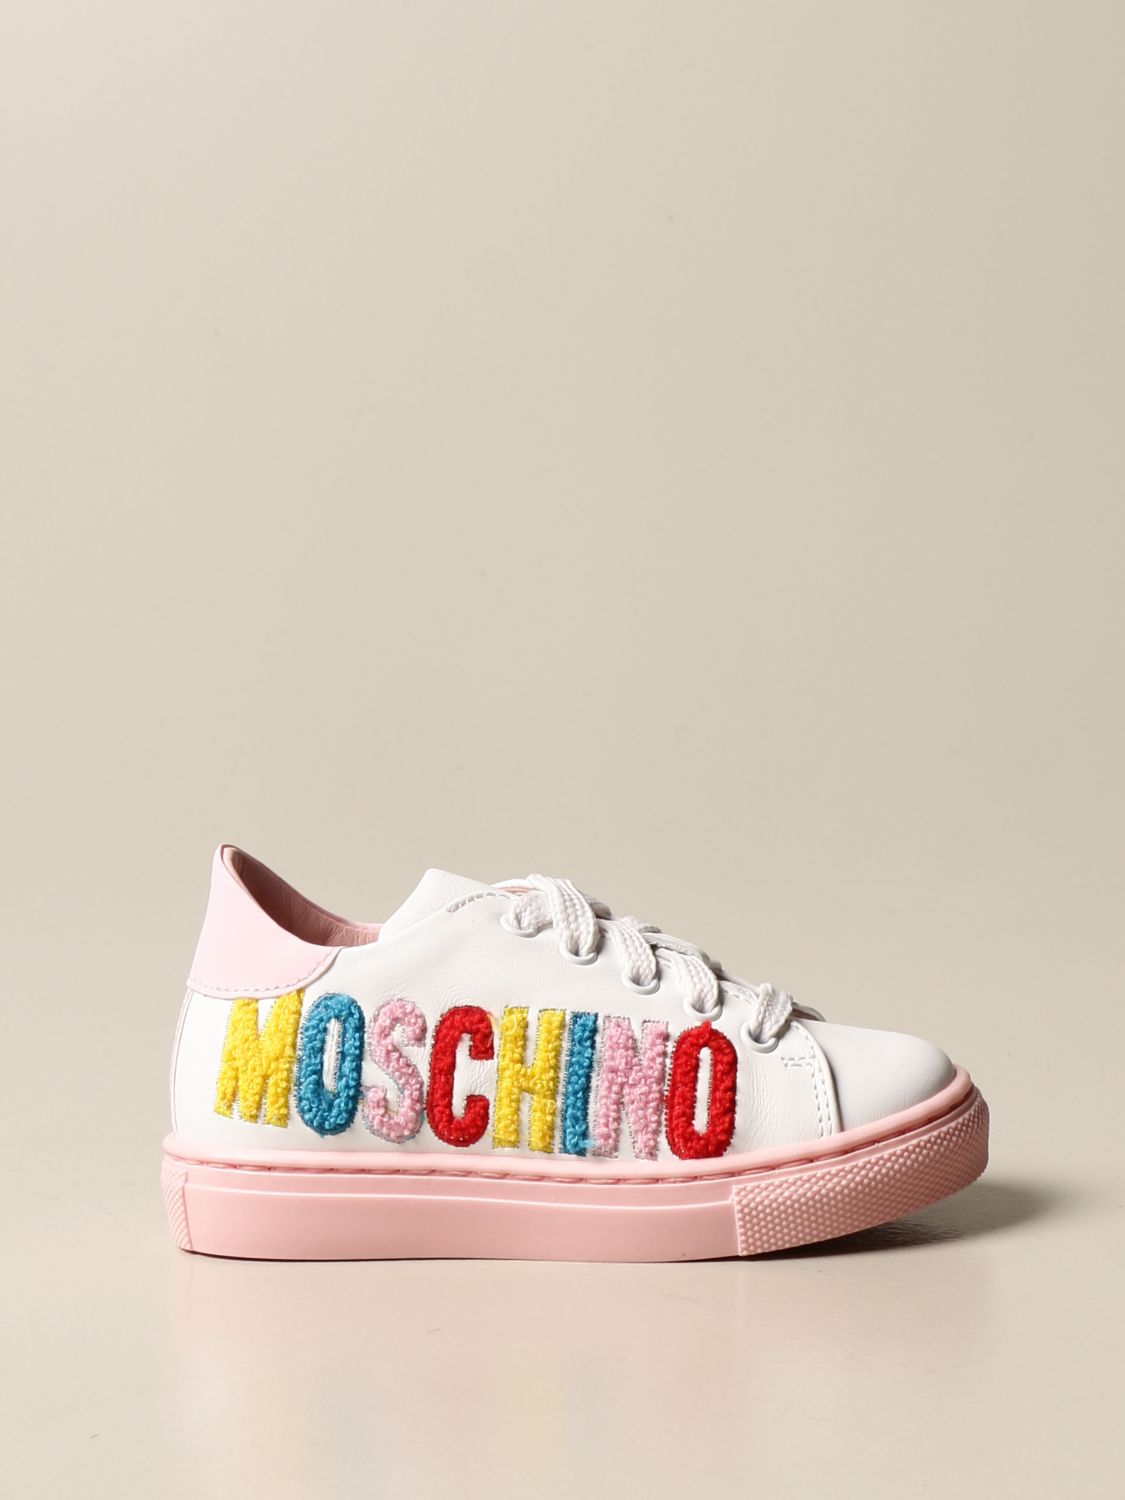 infant moschino shoes